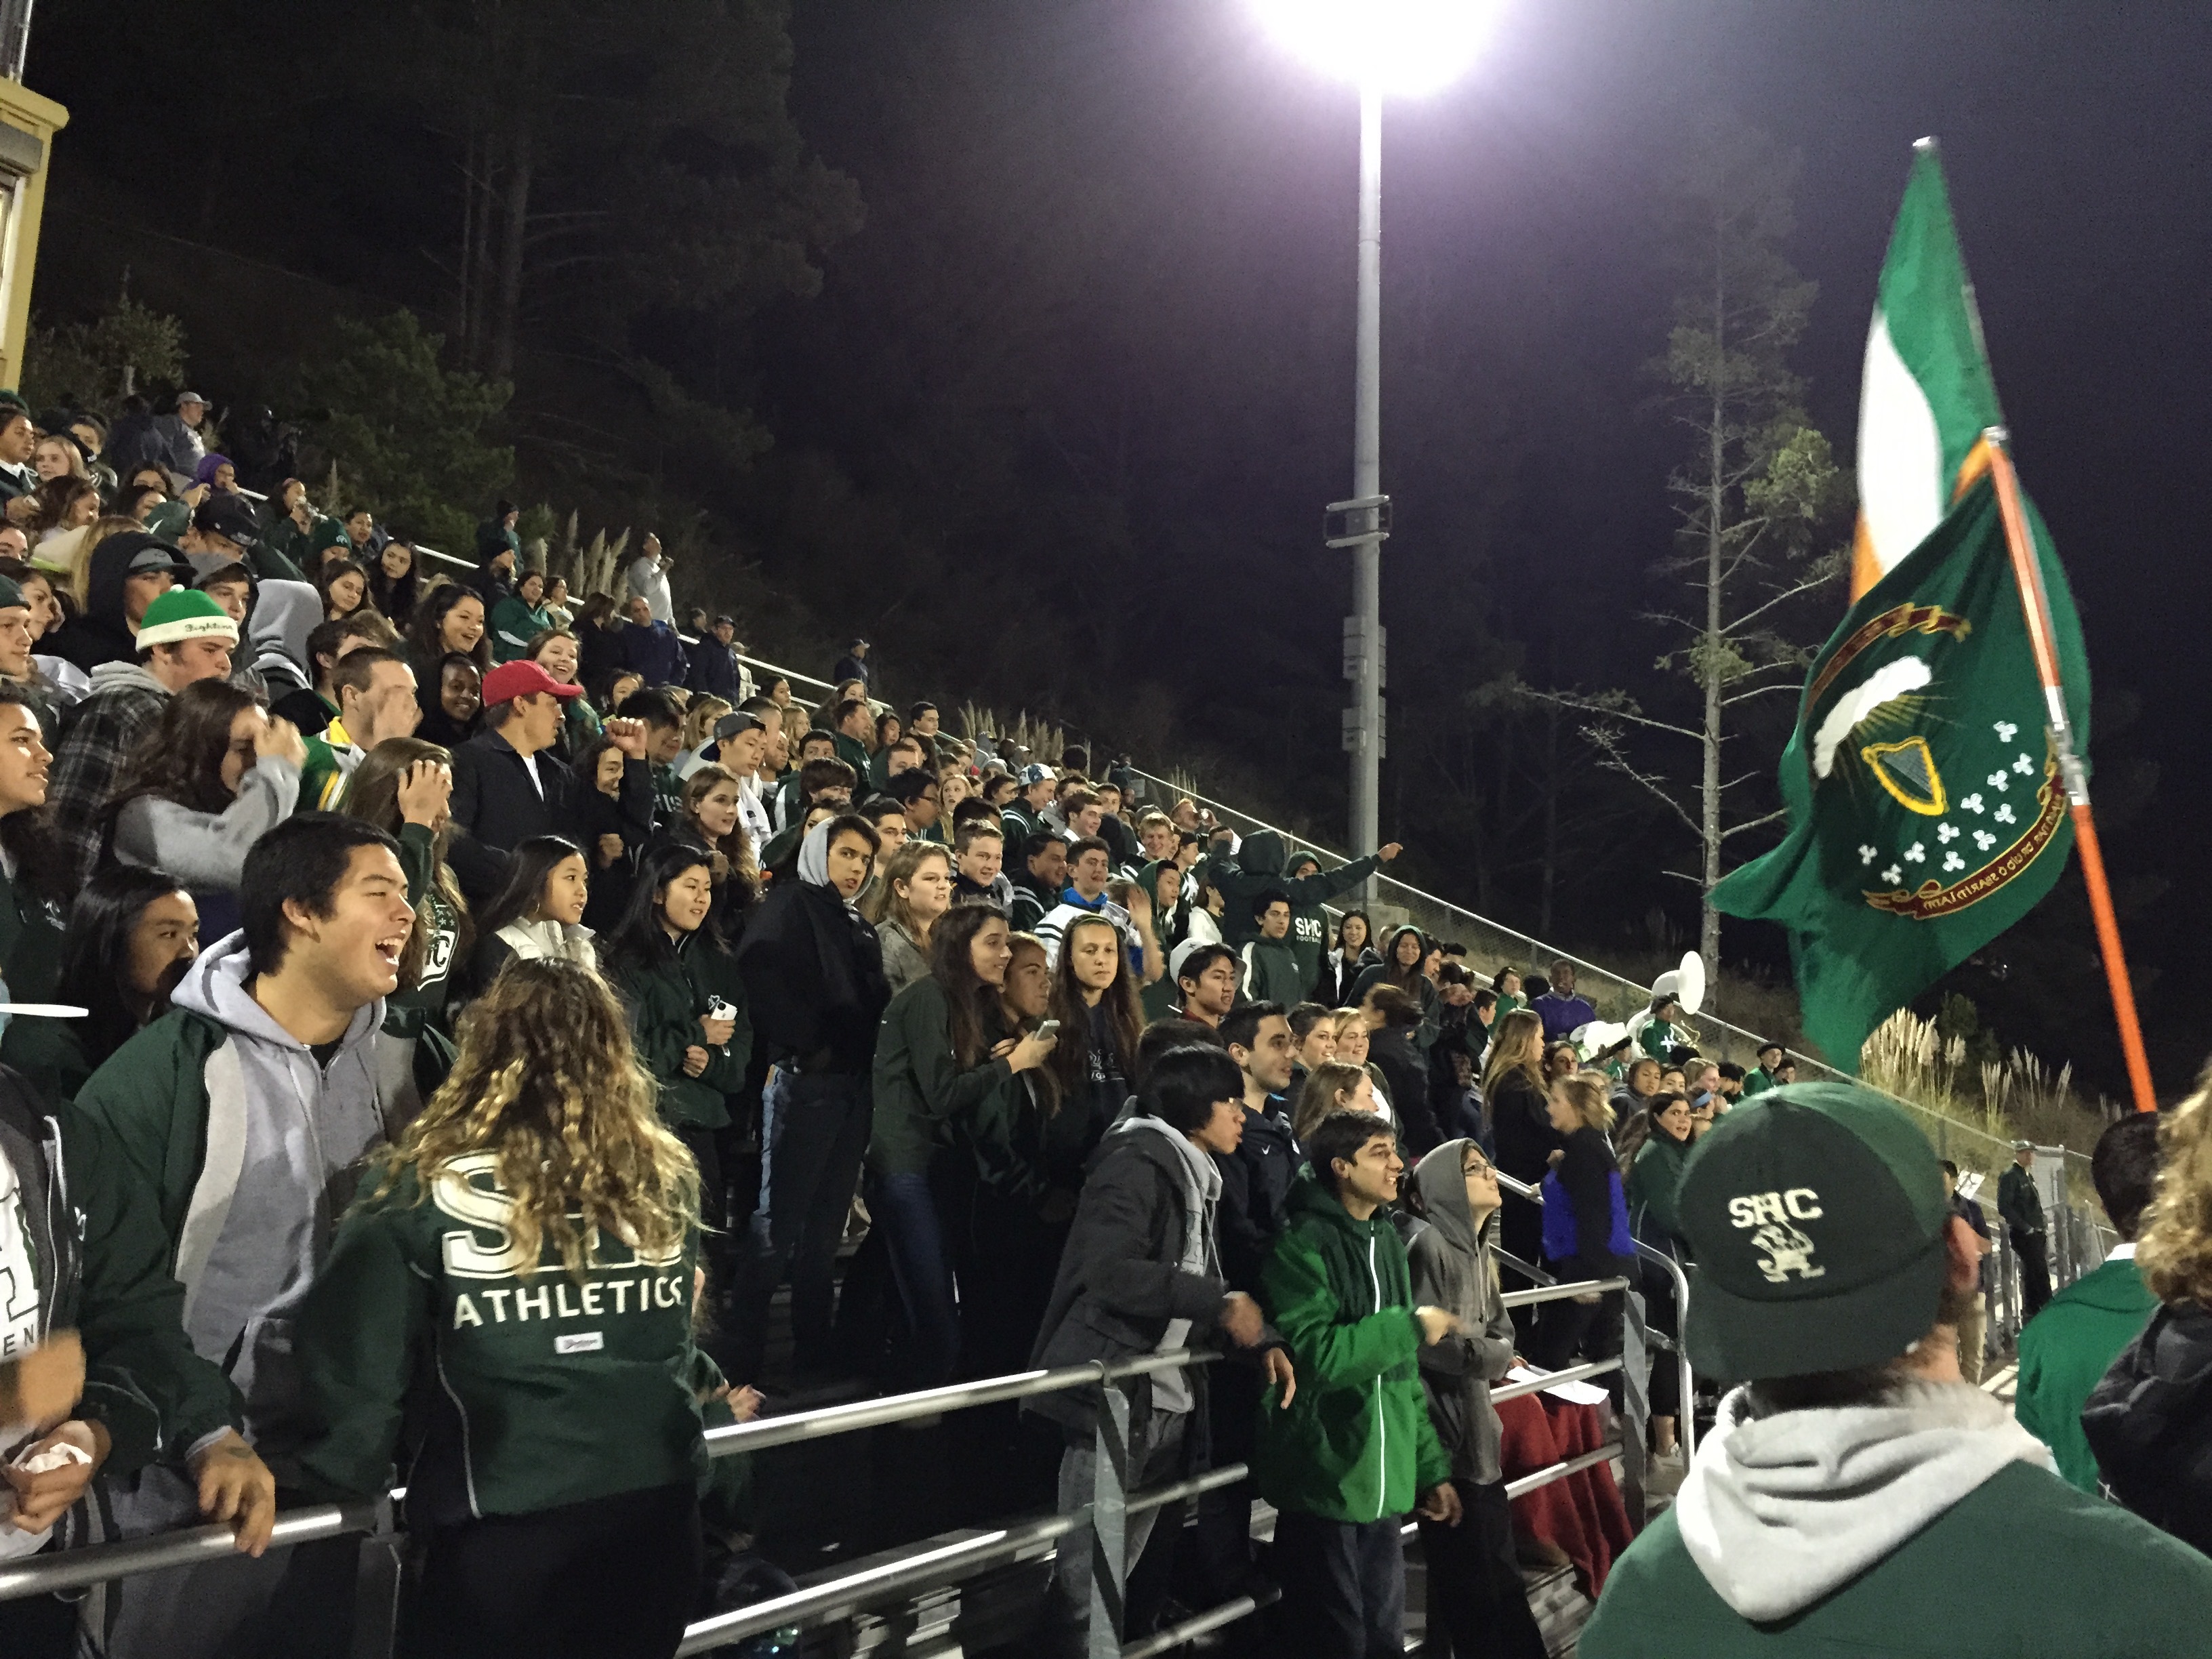 A huge crowd piled into the stands for Friday’s Homecoming football game to end the festive week on a spirited note.